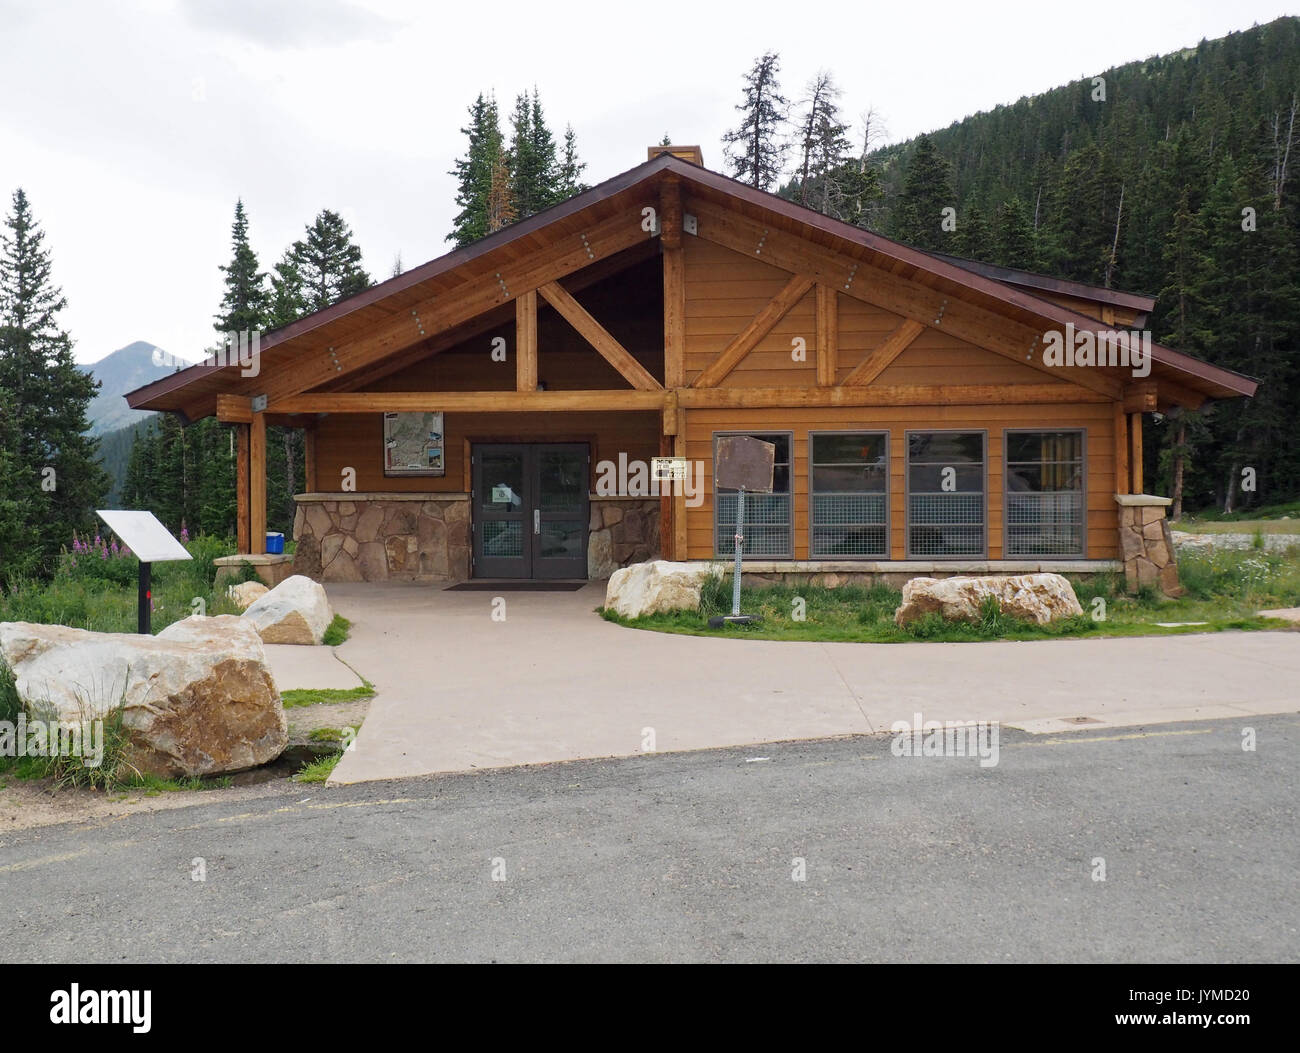 The visitor’s center at Berthoud Pass at the Continental Divide in the mountains in Colorado. Stock Photo